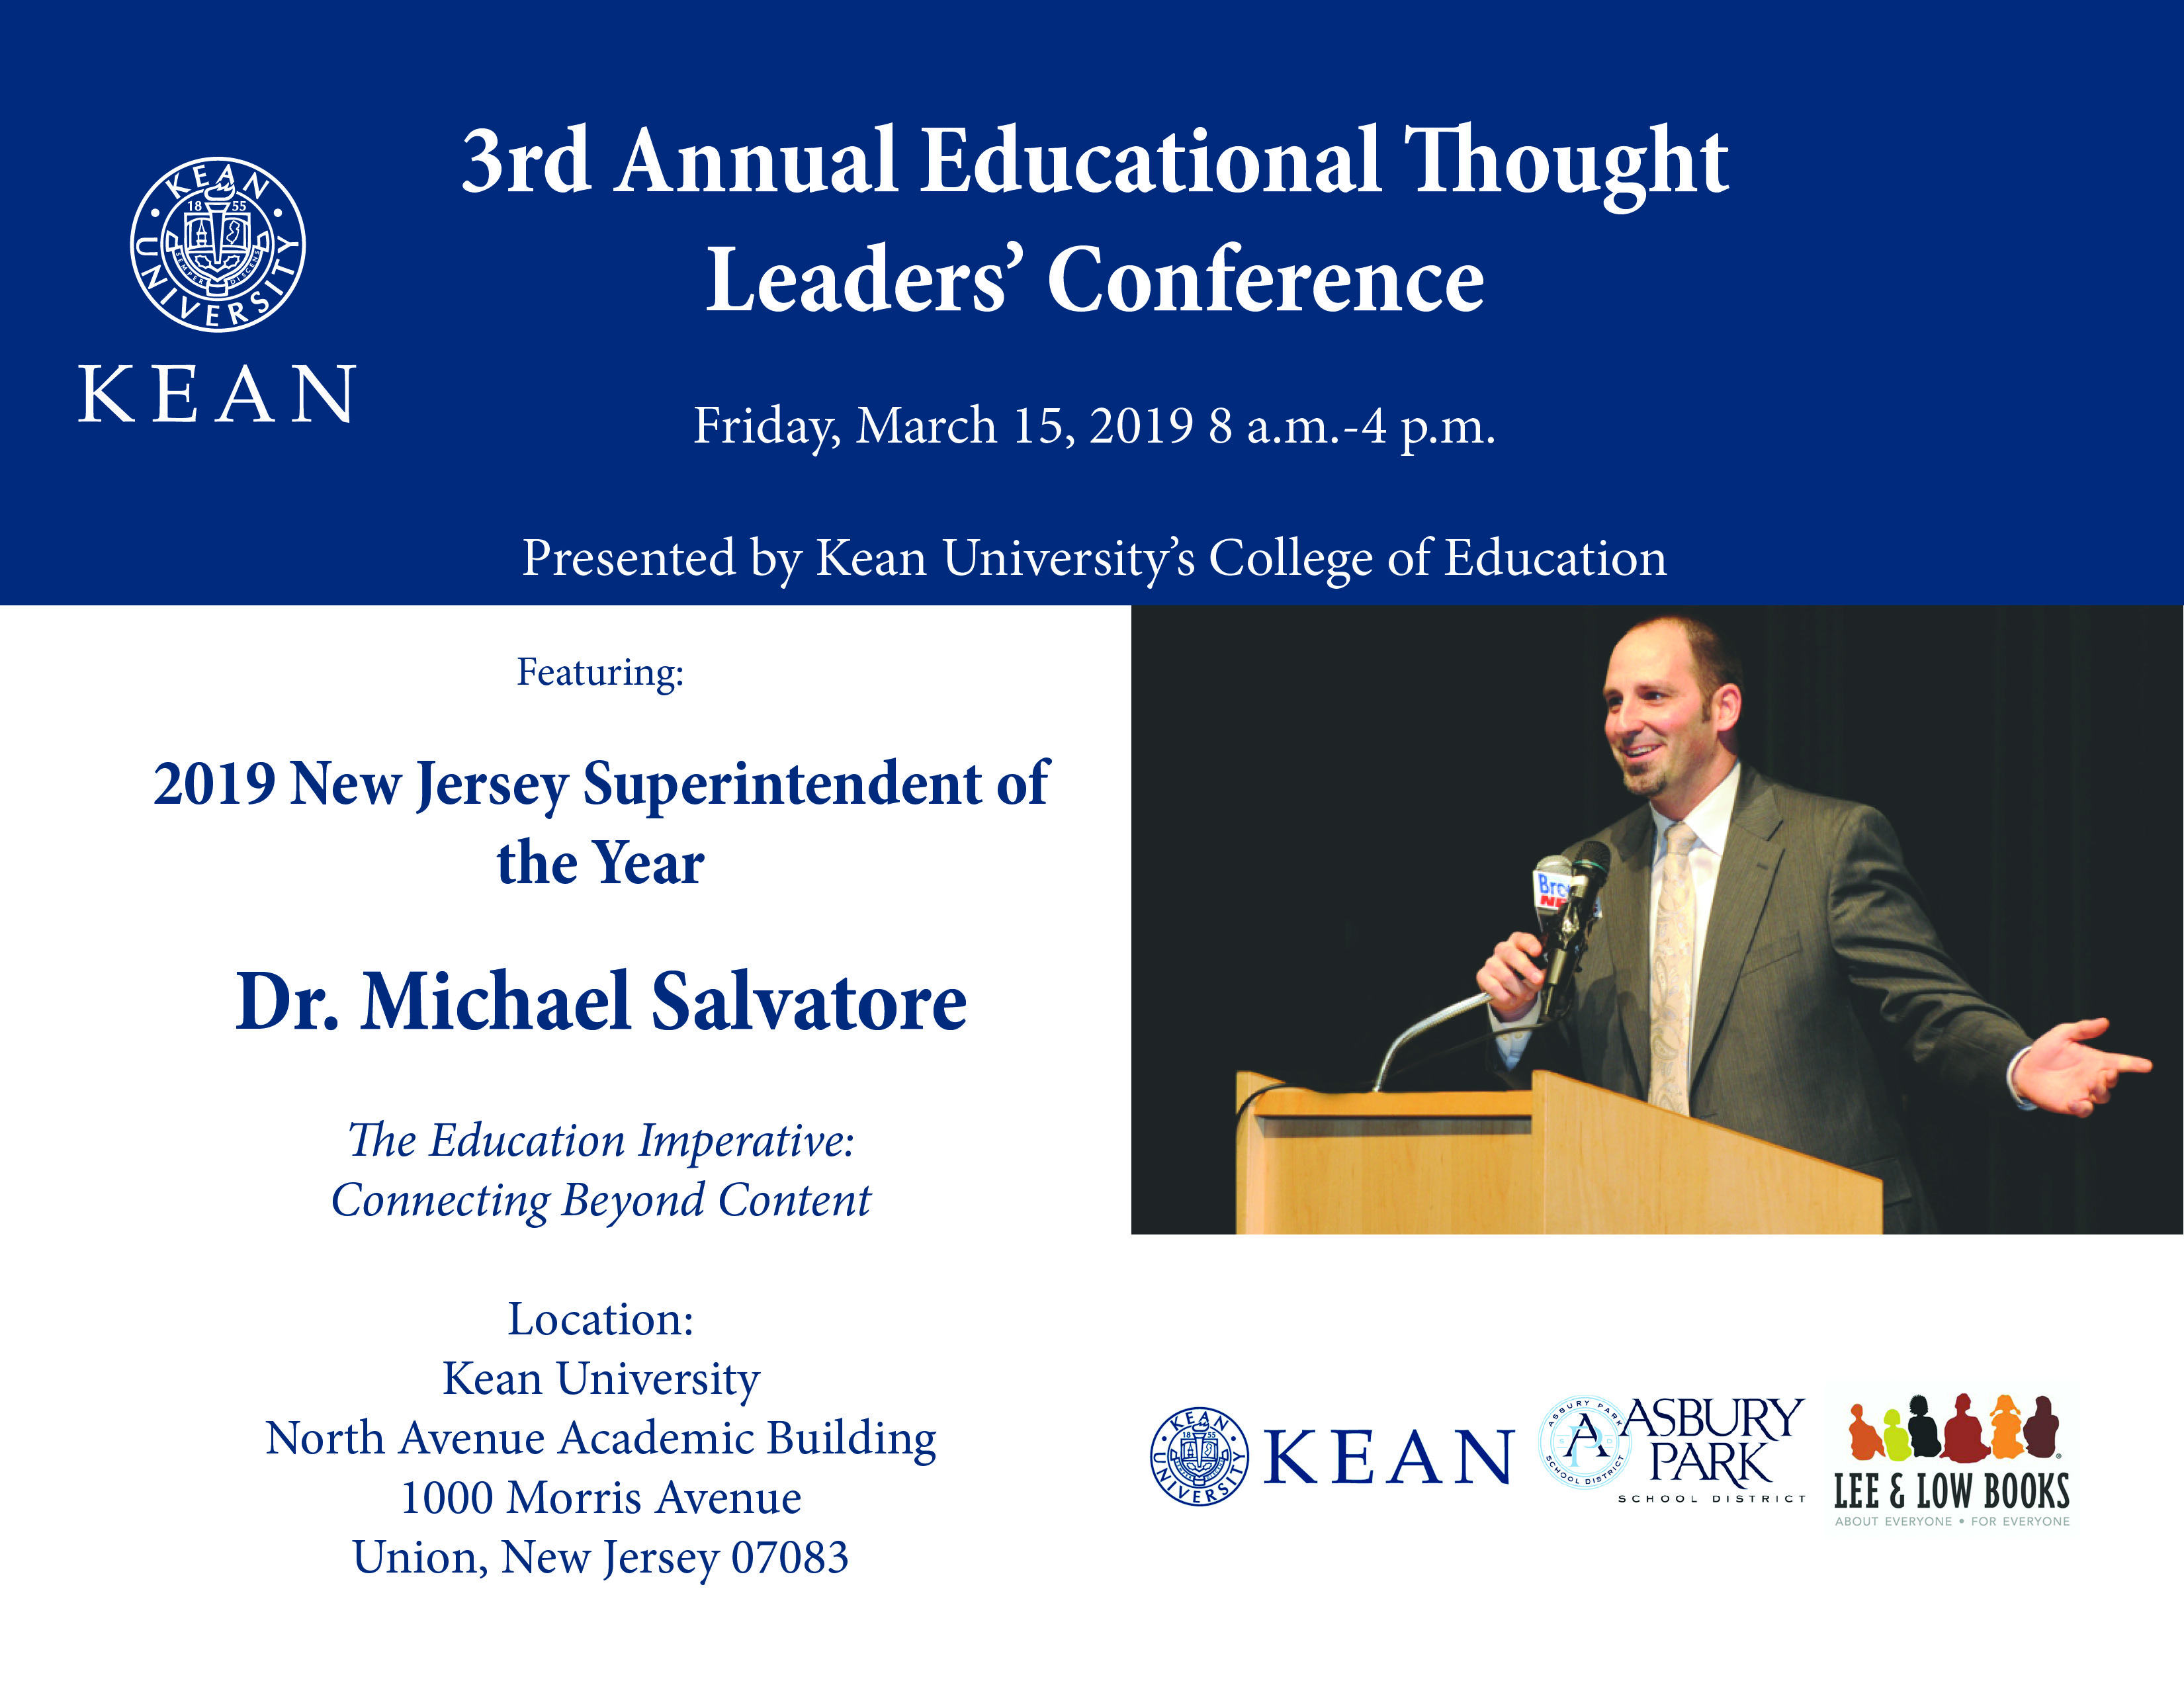 Educational Thought Leadership Conference https://www.kean.edu/academics/college-education